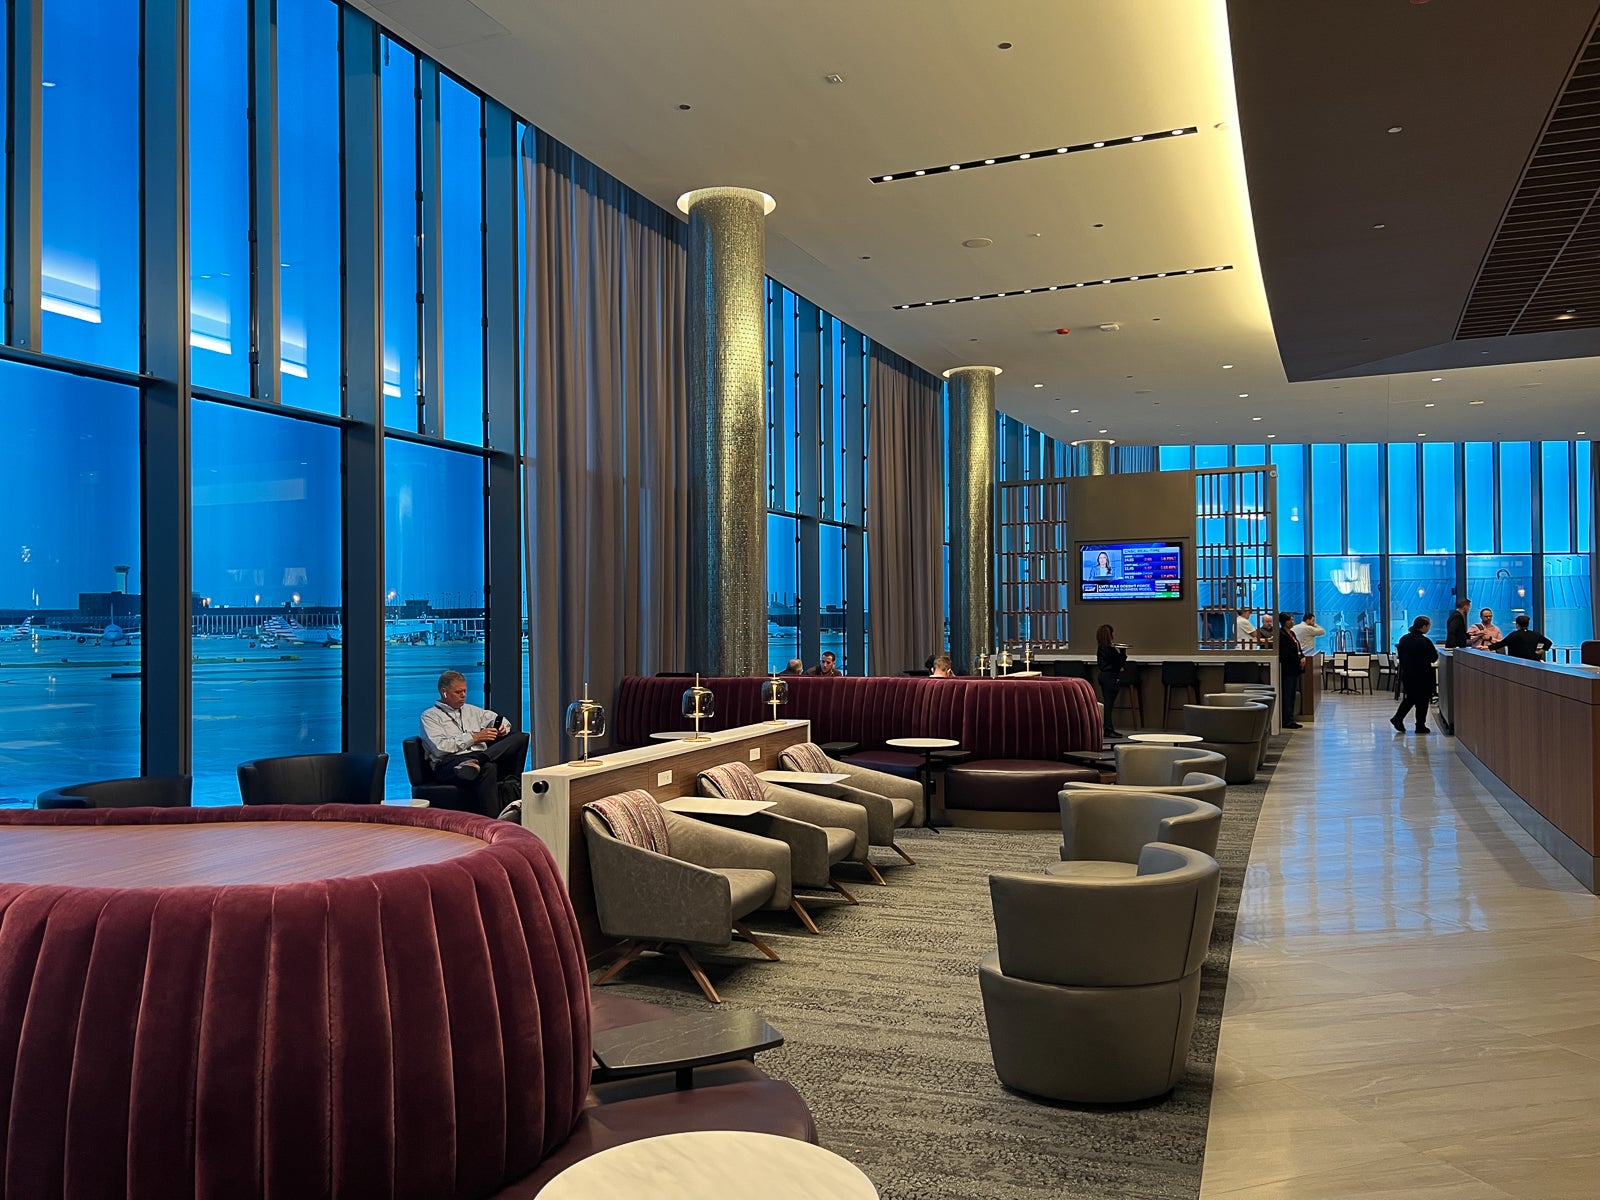 First look: Delta unveils new Sky Club and T5 gates at Chicago's O'Hare Airport